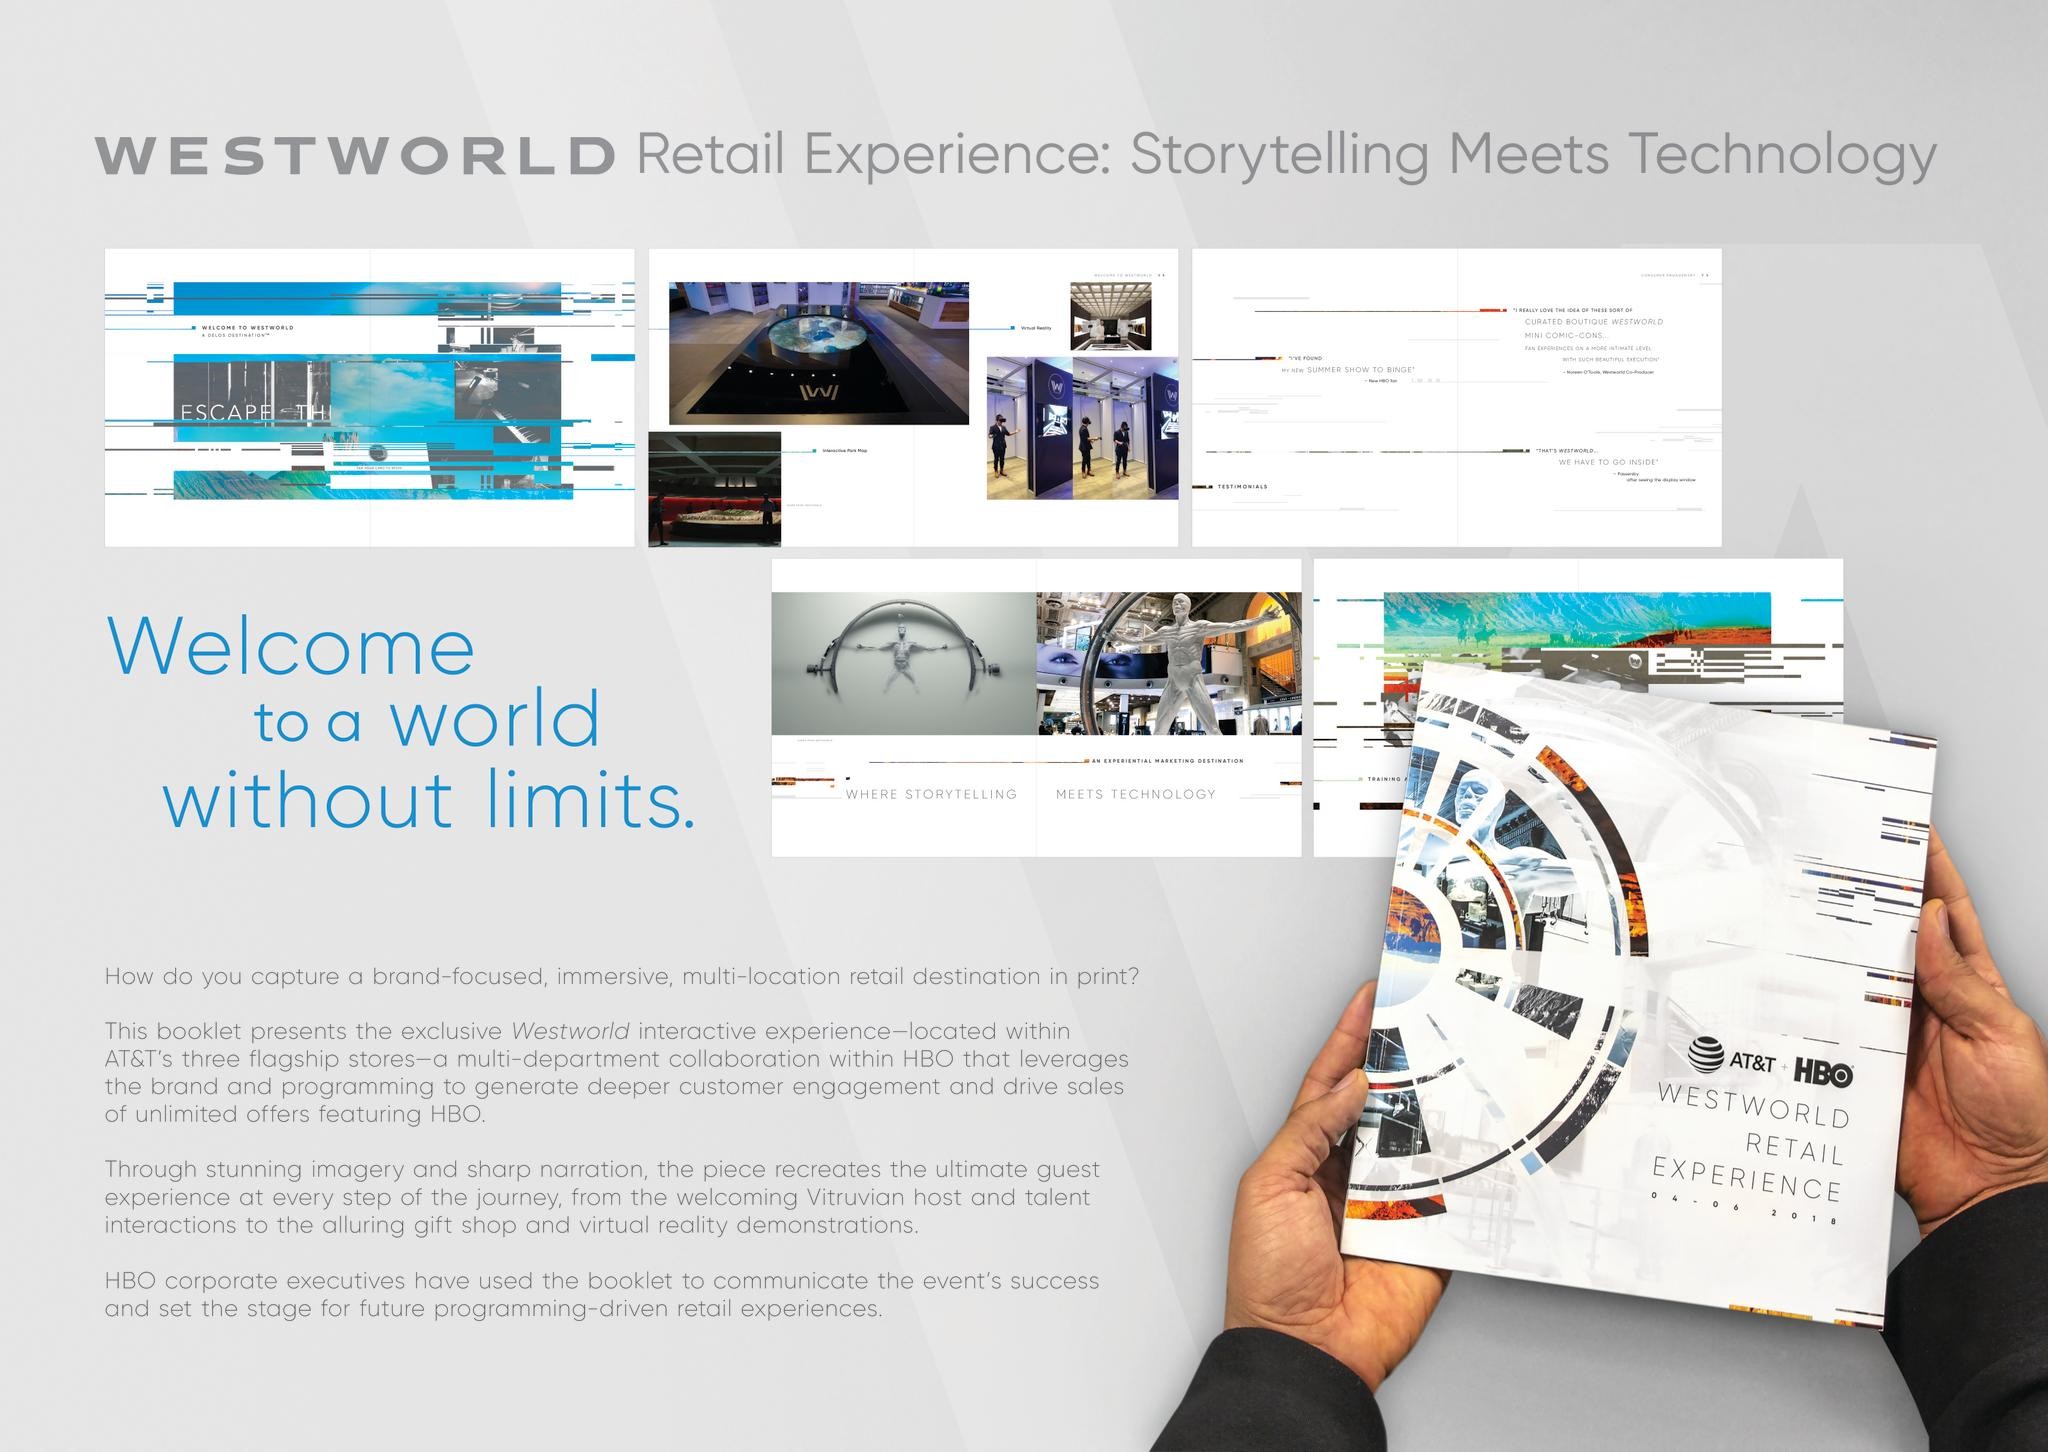 Westworld Retail Experience: Storytelling Meets Technology